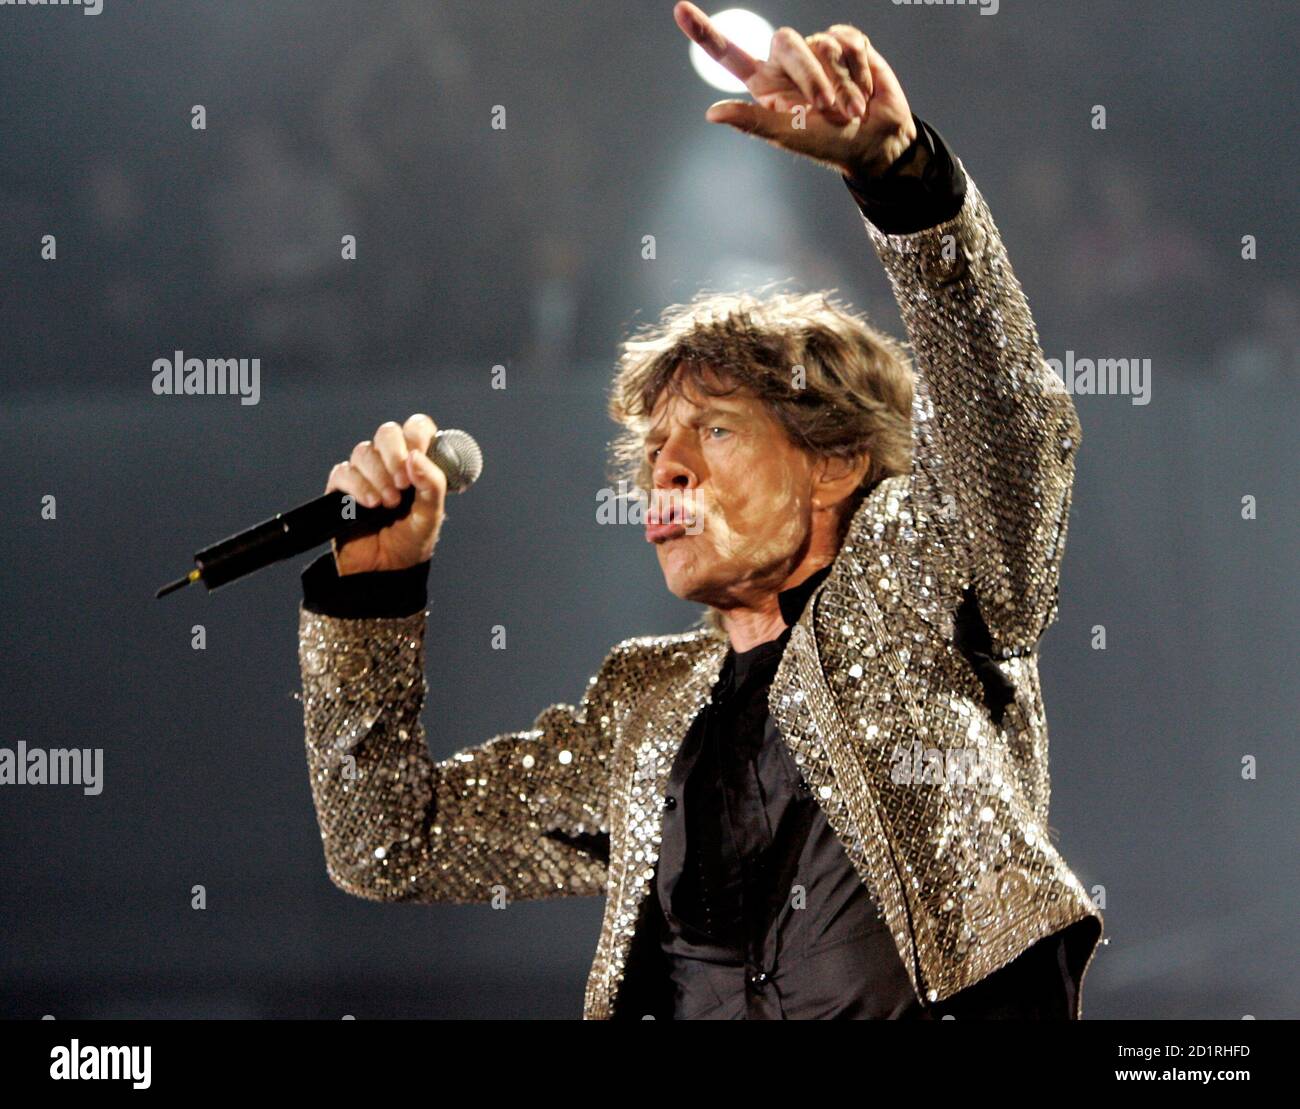 Mick Jagger performs with the Rolling Stones during their "A Bigger Bang  World Tour" in Anaheim November 4, 2005 Stock Photo - Alamy